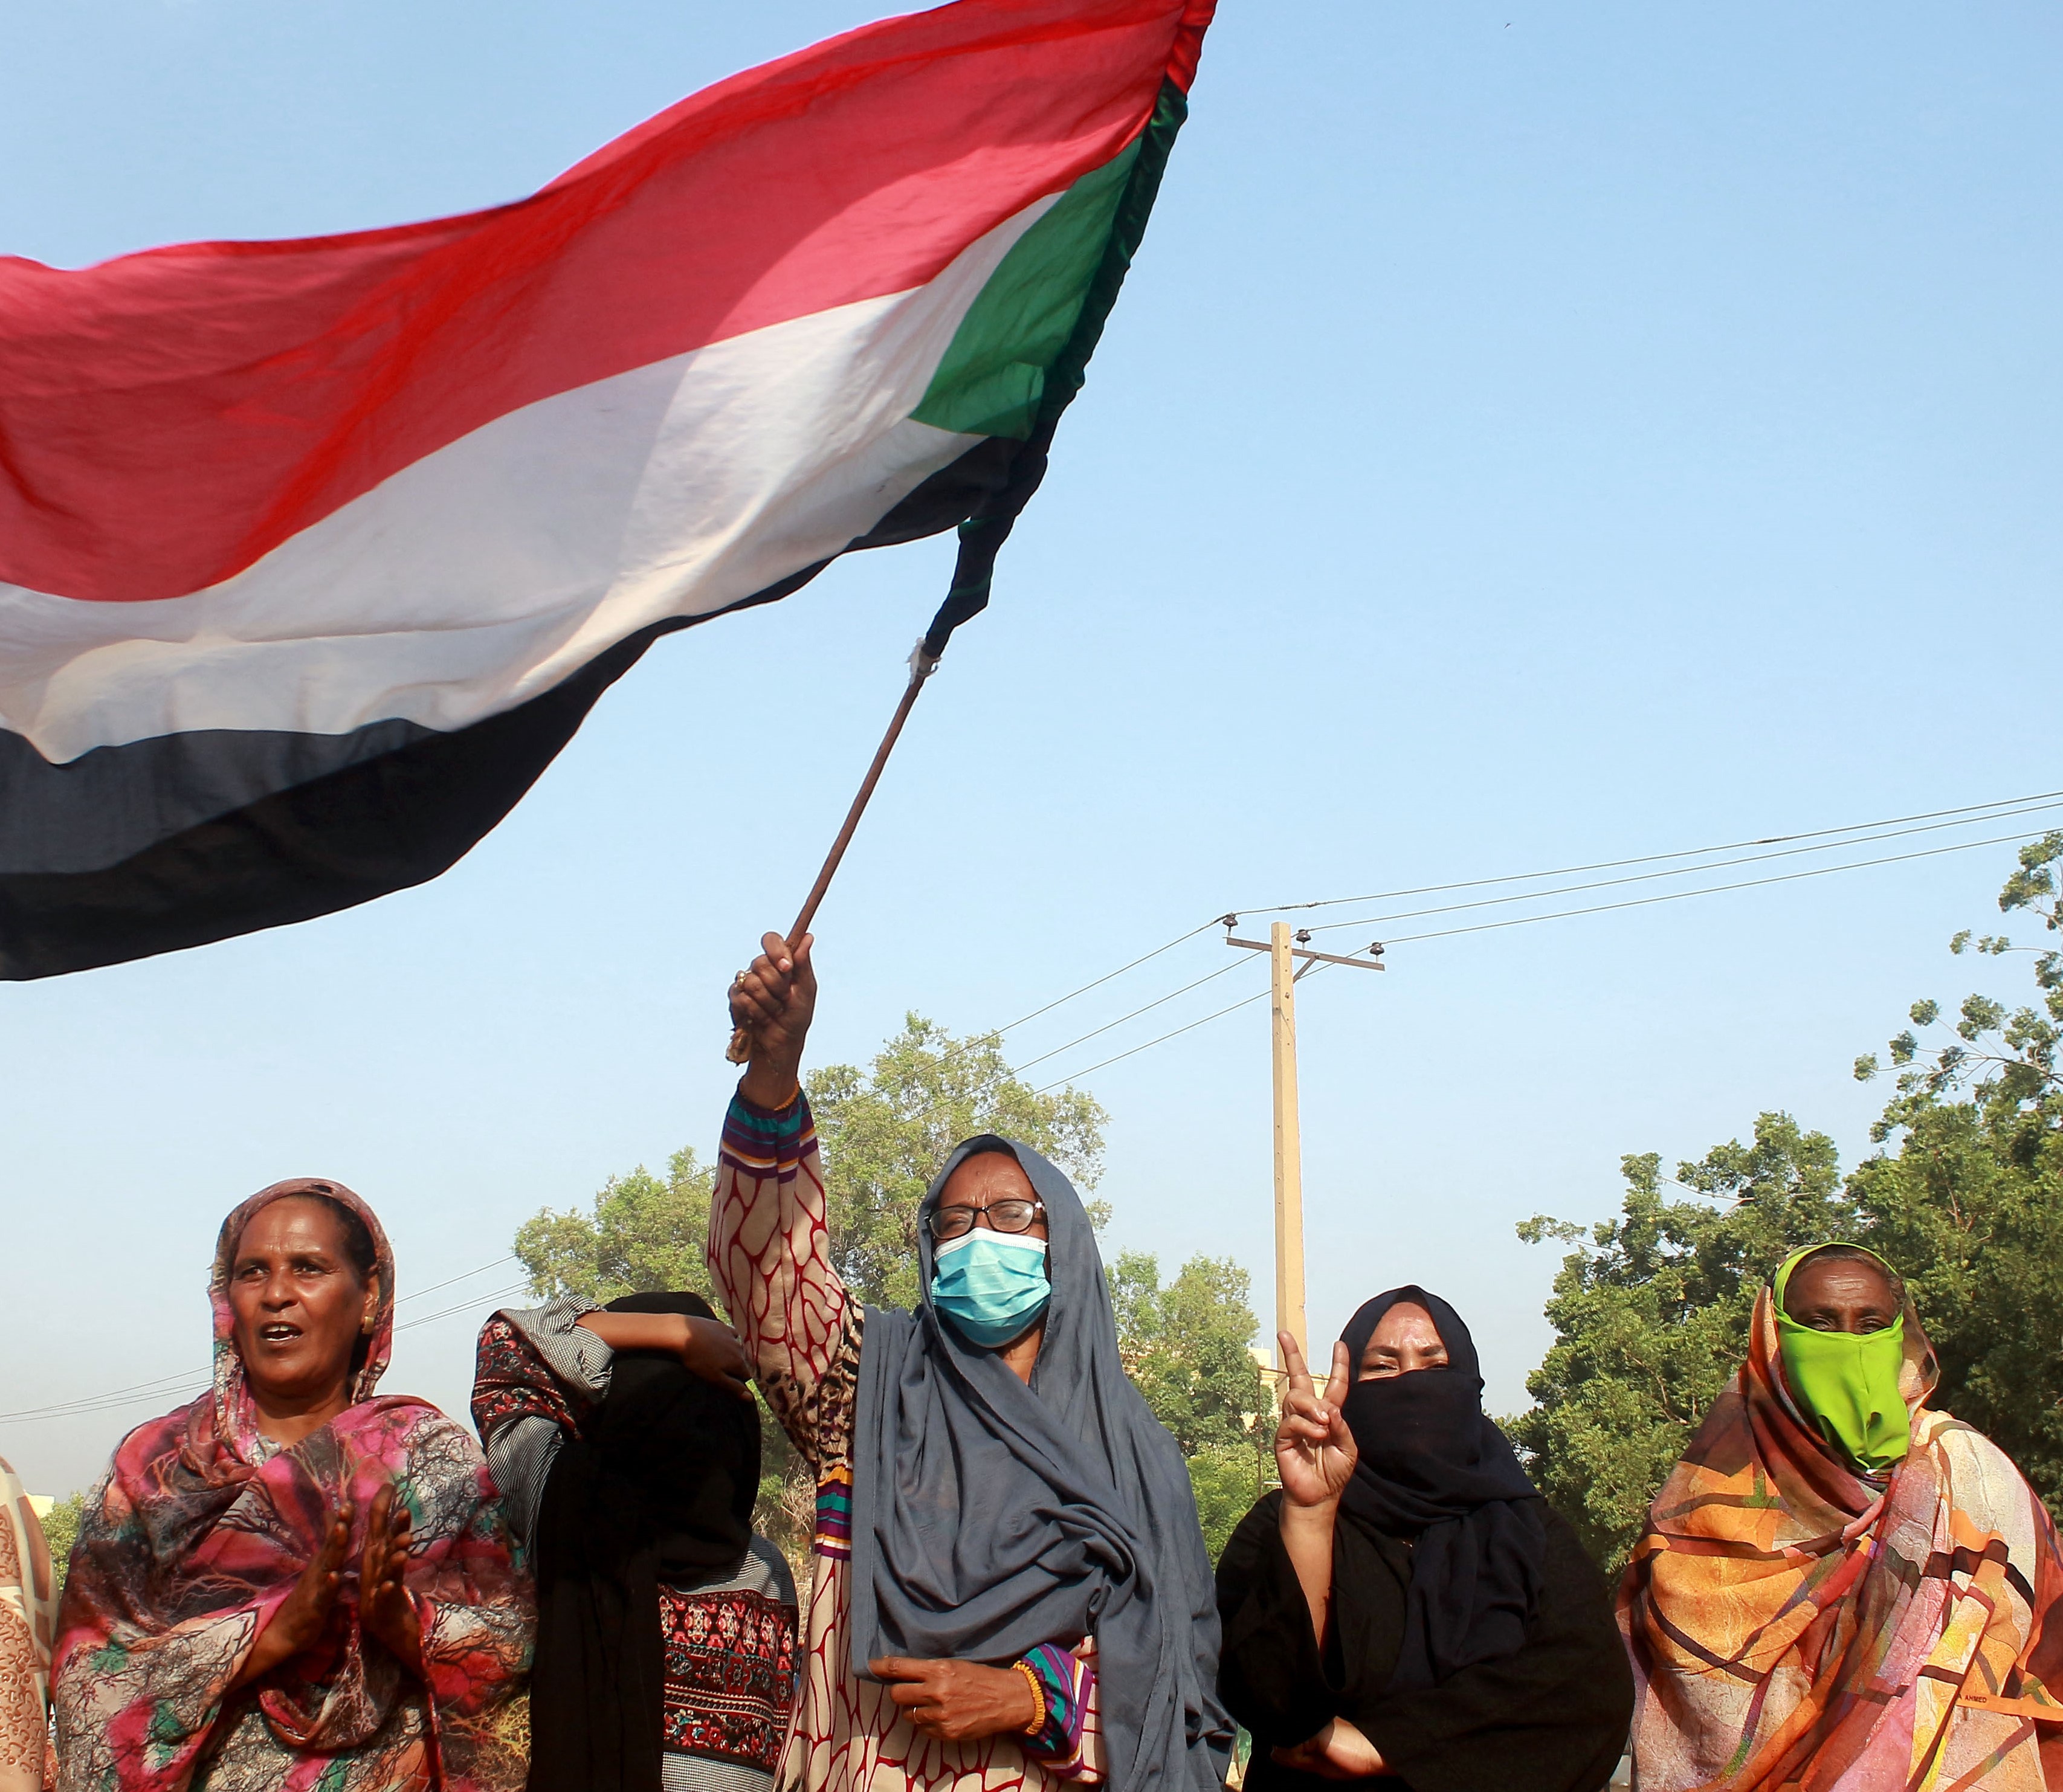 Sudanese protest against a military coup that overthrew the transition to civilian rule, on October 25, 2021 in the al-Shajara district in southern Khartoum